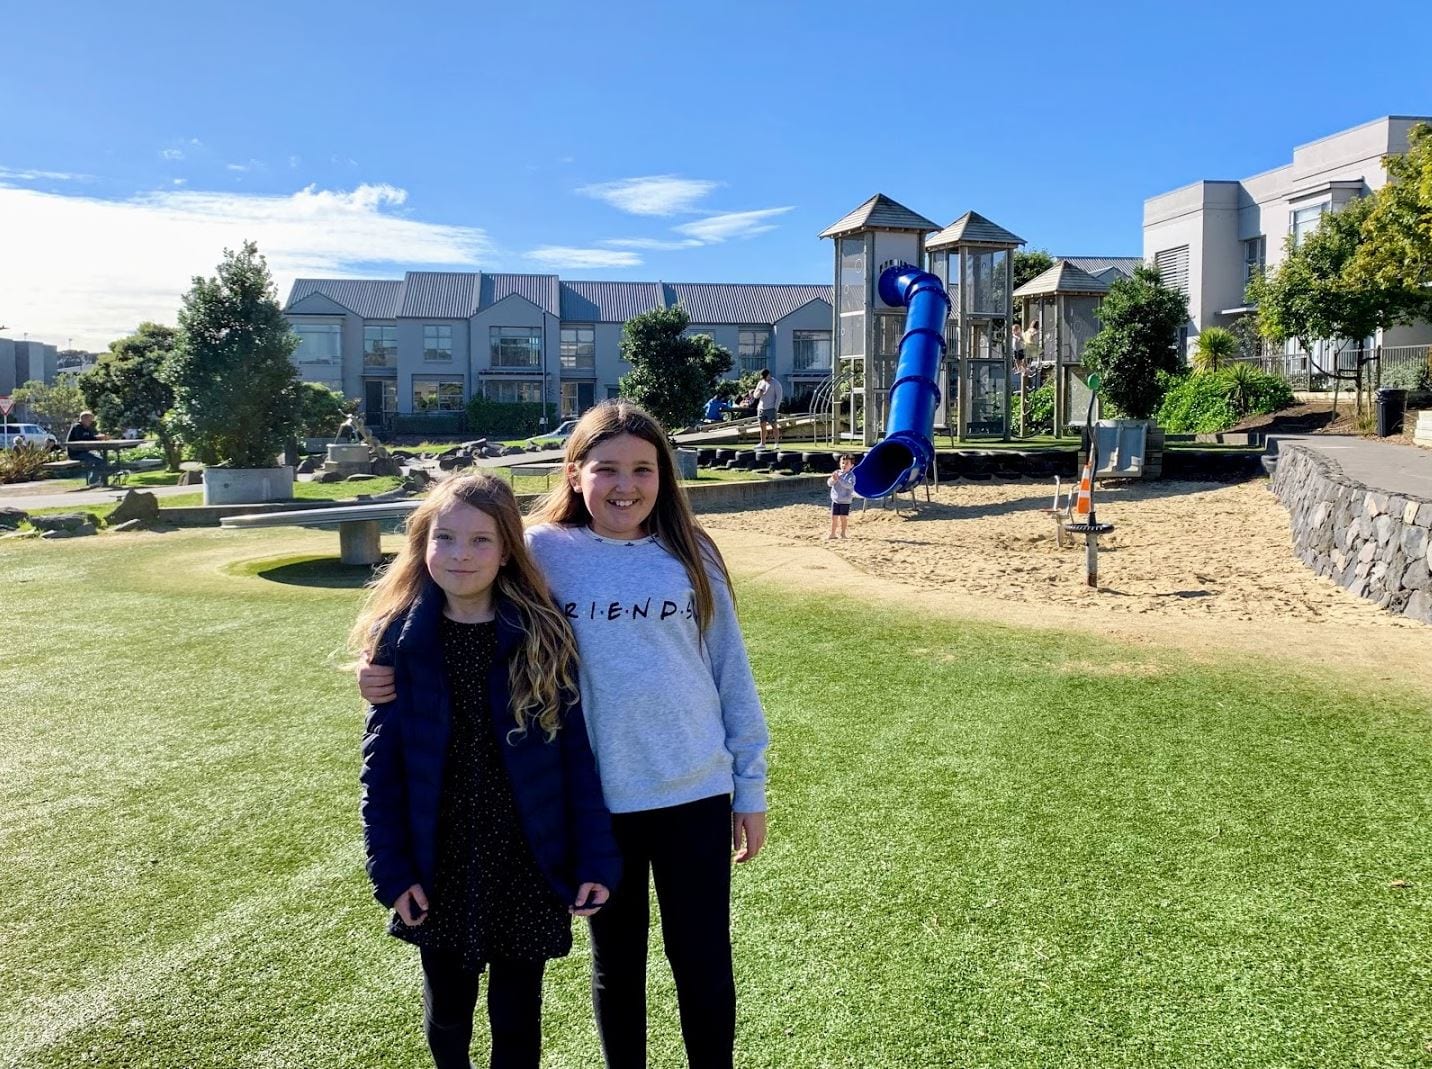 Auckland for Kids visits Stonefield playground